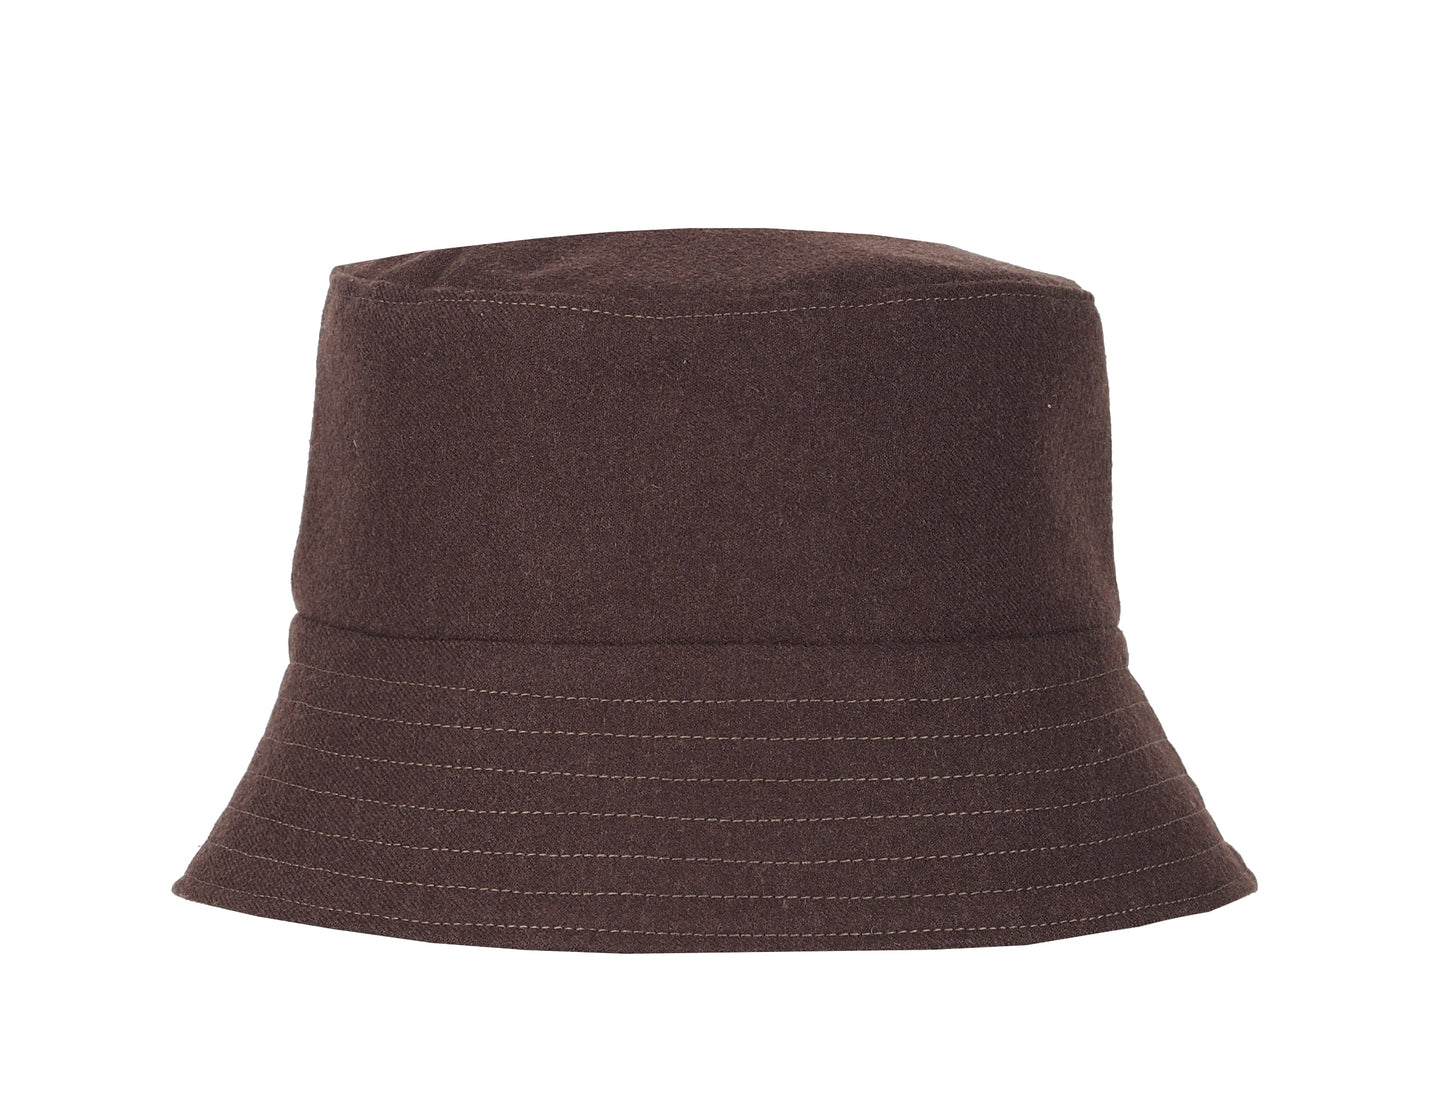 UPCYCLED WOOL BUCKET HAT